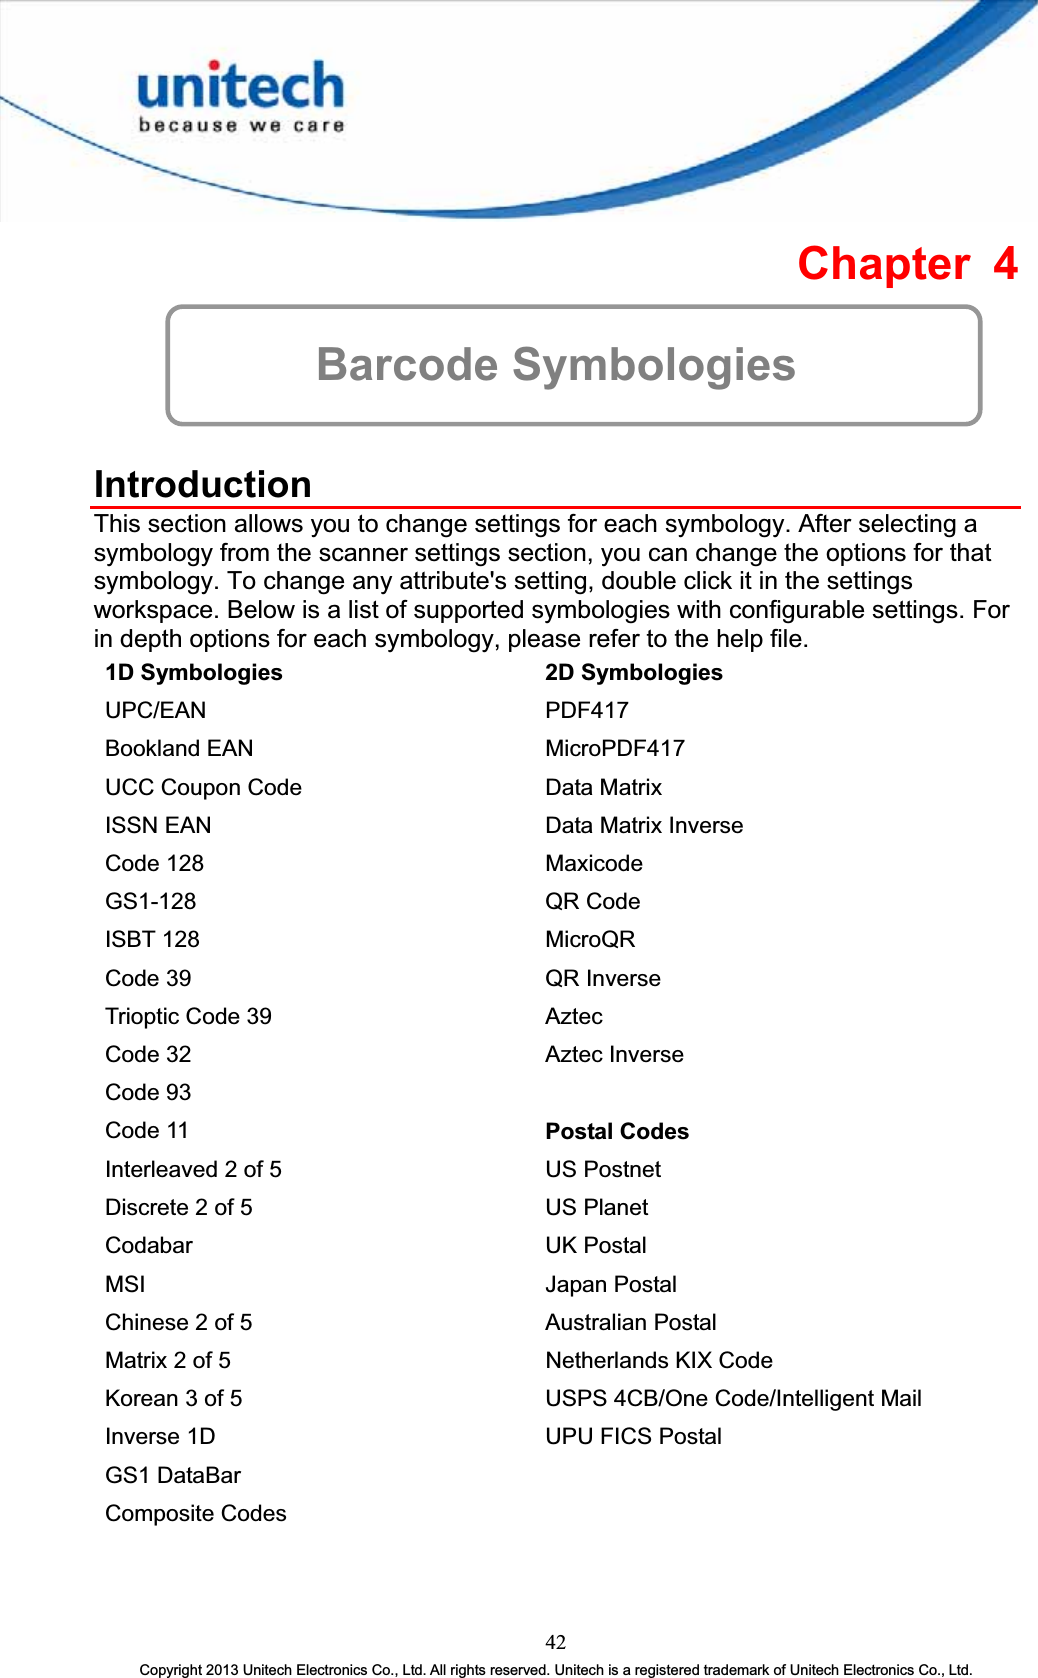 Chapter 4 Barcode Symbologies IntroductionThis section allows you to change settings for each symbology. After selecting a symbology from the scanner settings section, you can change the options for that symbology. To change any attribute&apos;s setting, double click it in the settings workspace. Below is a list of supported symbologies with configurable settings. For in depth options for each symbology, please refer to the help file. 1D Symbologies  2D Symbologies UPC/EAN PDF417Bookland EAN  MicroPDF417 UCC Coupon Code  Data Matrix ISSN EAN  Data Matrix Inverse Code 128  MaxicodeGS1-128 QR CodeISBT 128  MicroQRCode 39  QR Inverse Trioptic Code 39  AztecCode 32  Aztec Inverse Code 93 Code 11  Postal Codes Interleaved 2 of 5  US Postnet Discrete 2 of 5  US Planet Codabar UK Postal MSI Japan Postal Chinese 2 of 5  Australian Postal Matrix 2 of 5  Netherlands KIX Code Korean 3 of 5  USPS 4CB/One Code/Intelligent Mail Inverse 1D  UPU FICS Postal GS1 DataBar Composite Codes 42Copyright 2013 Unitech Electronics Co., Ltd. All rights reserved. Unitech is a registered trademark of Unitech Electronics Co., Ltd. 